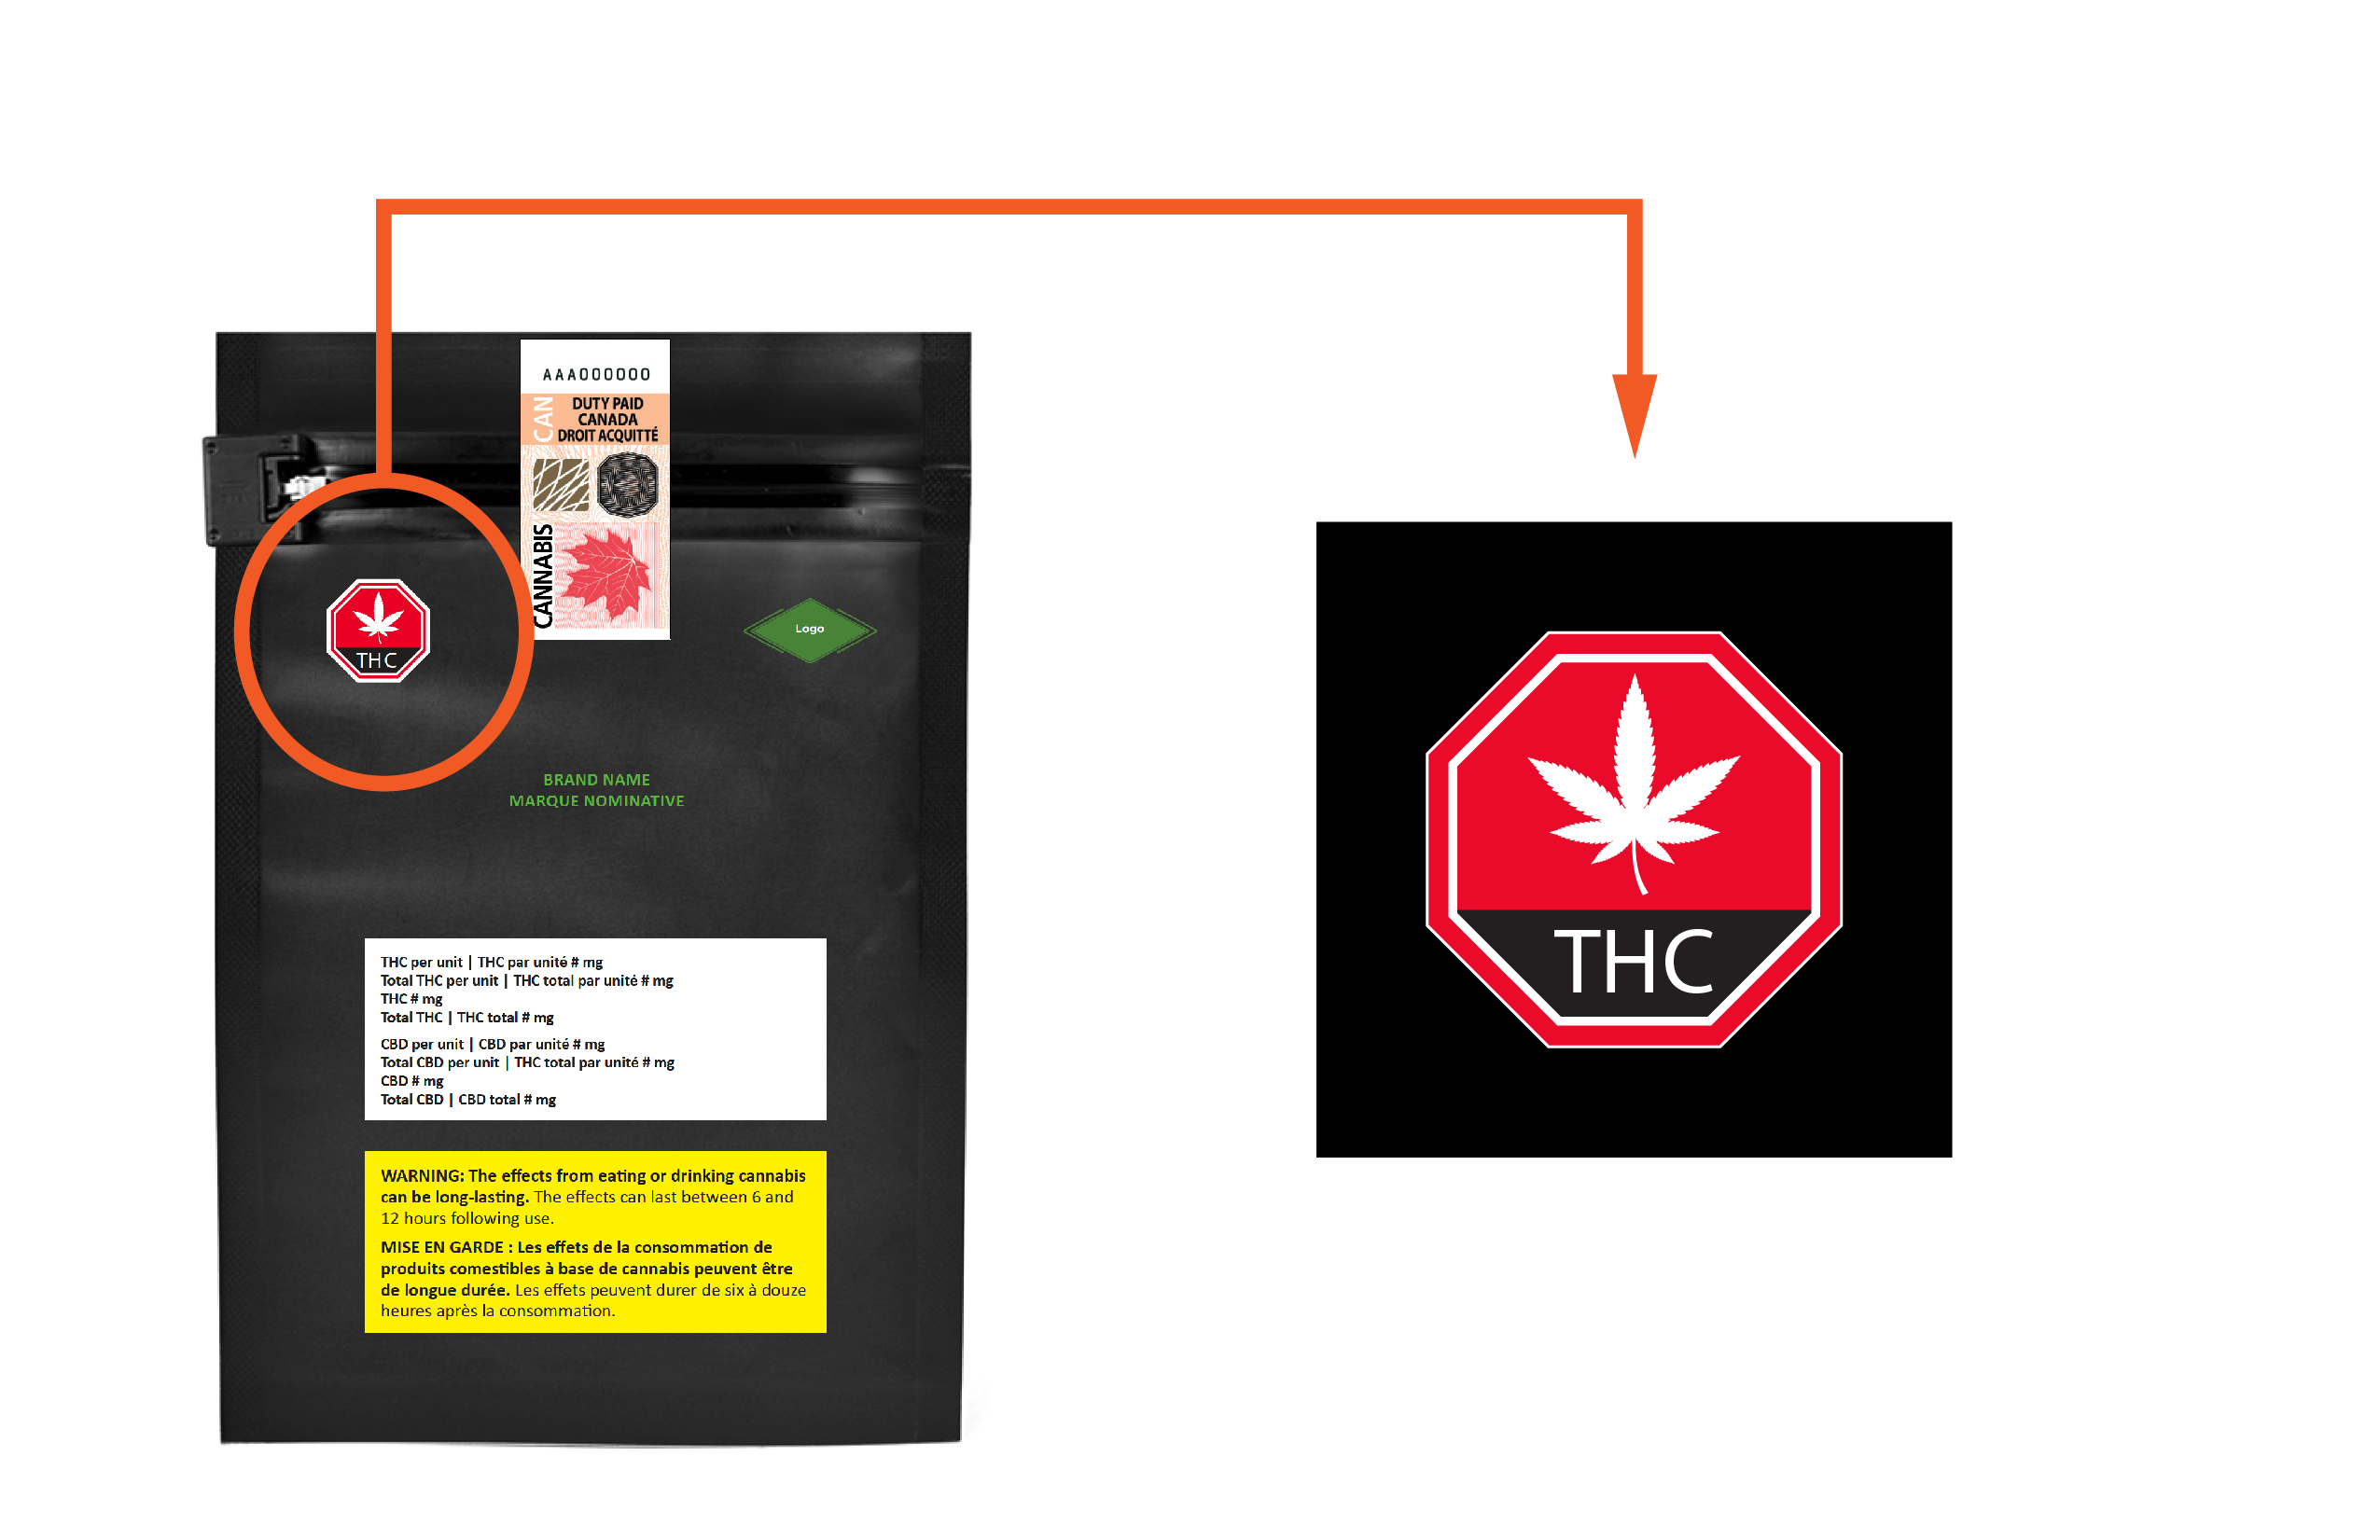 Example of standard cannabis symbol on packaging for cannabis edible